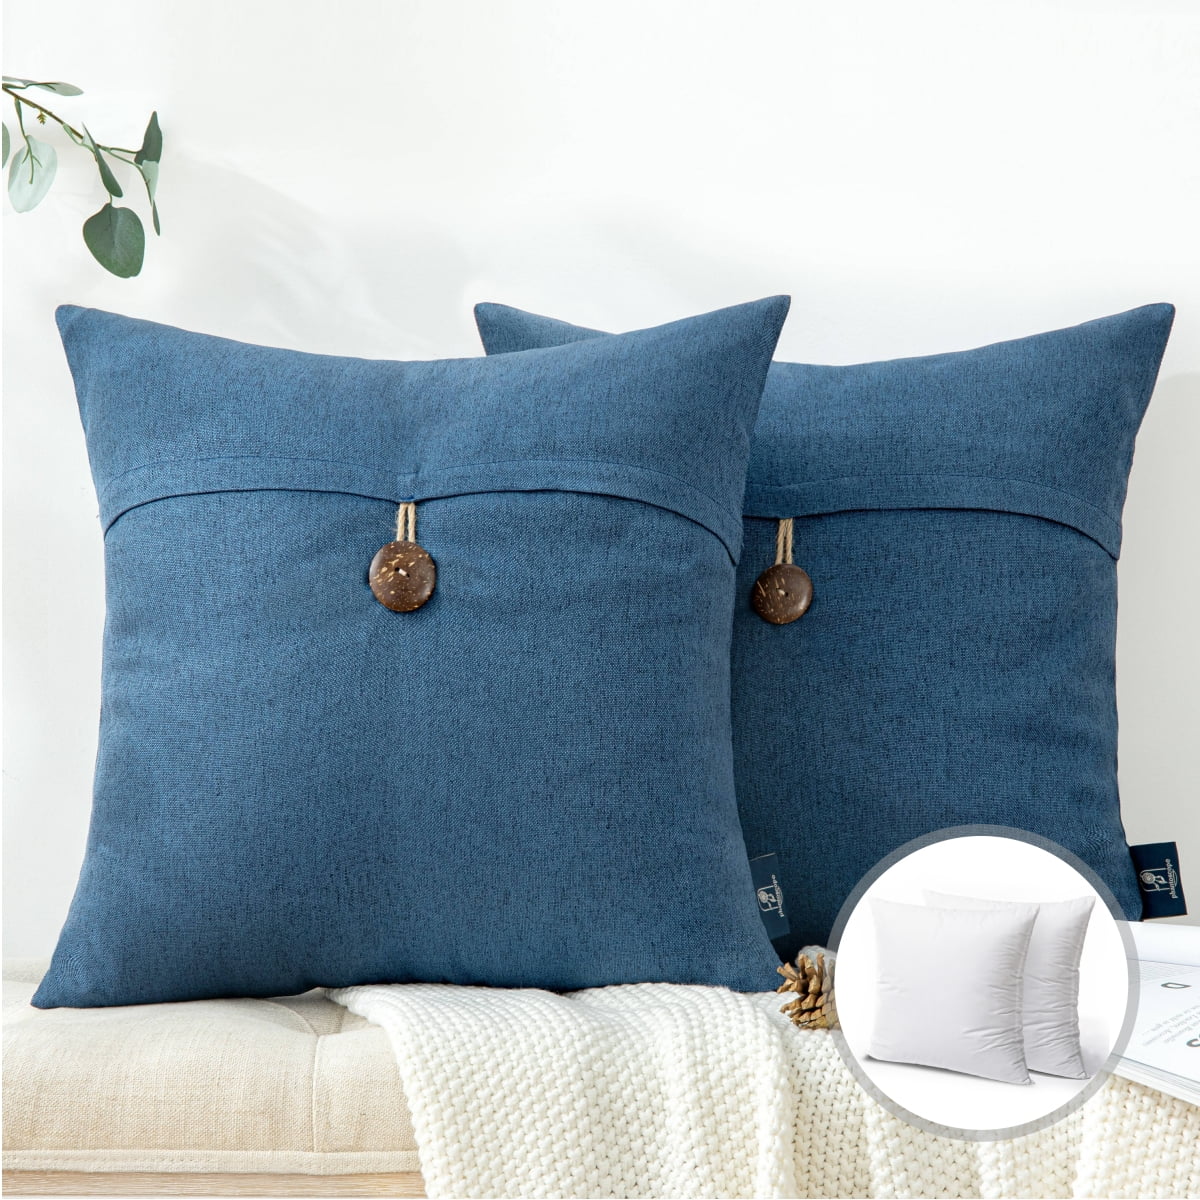 18-inch Double-corded Solid Twill Square Throw Pillows with Inserts (Set of  2) - Aqua Blue